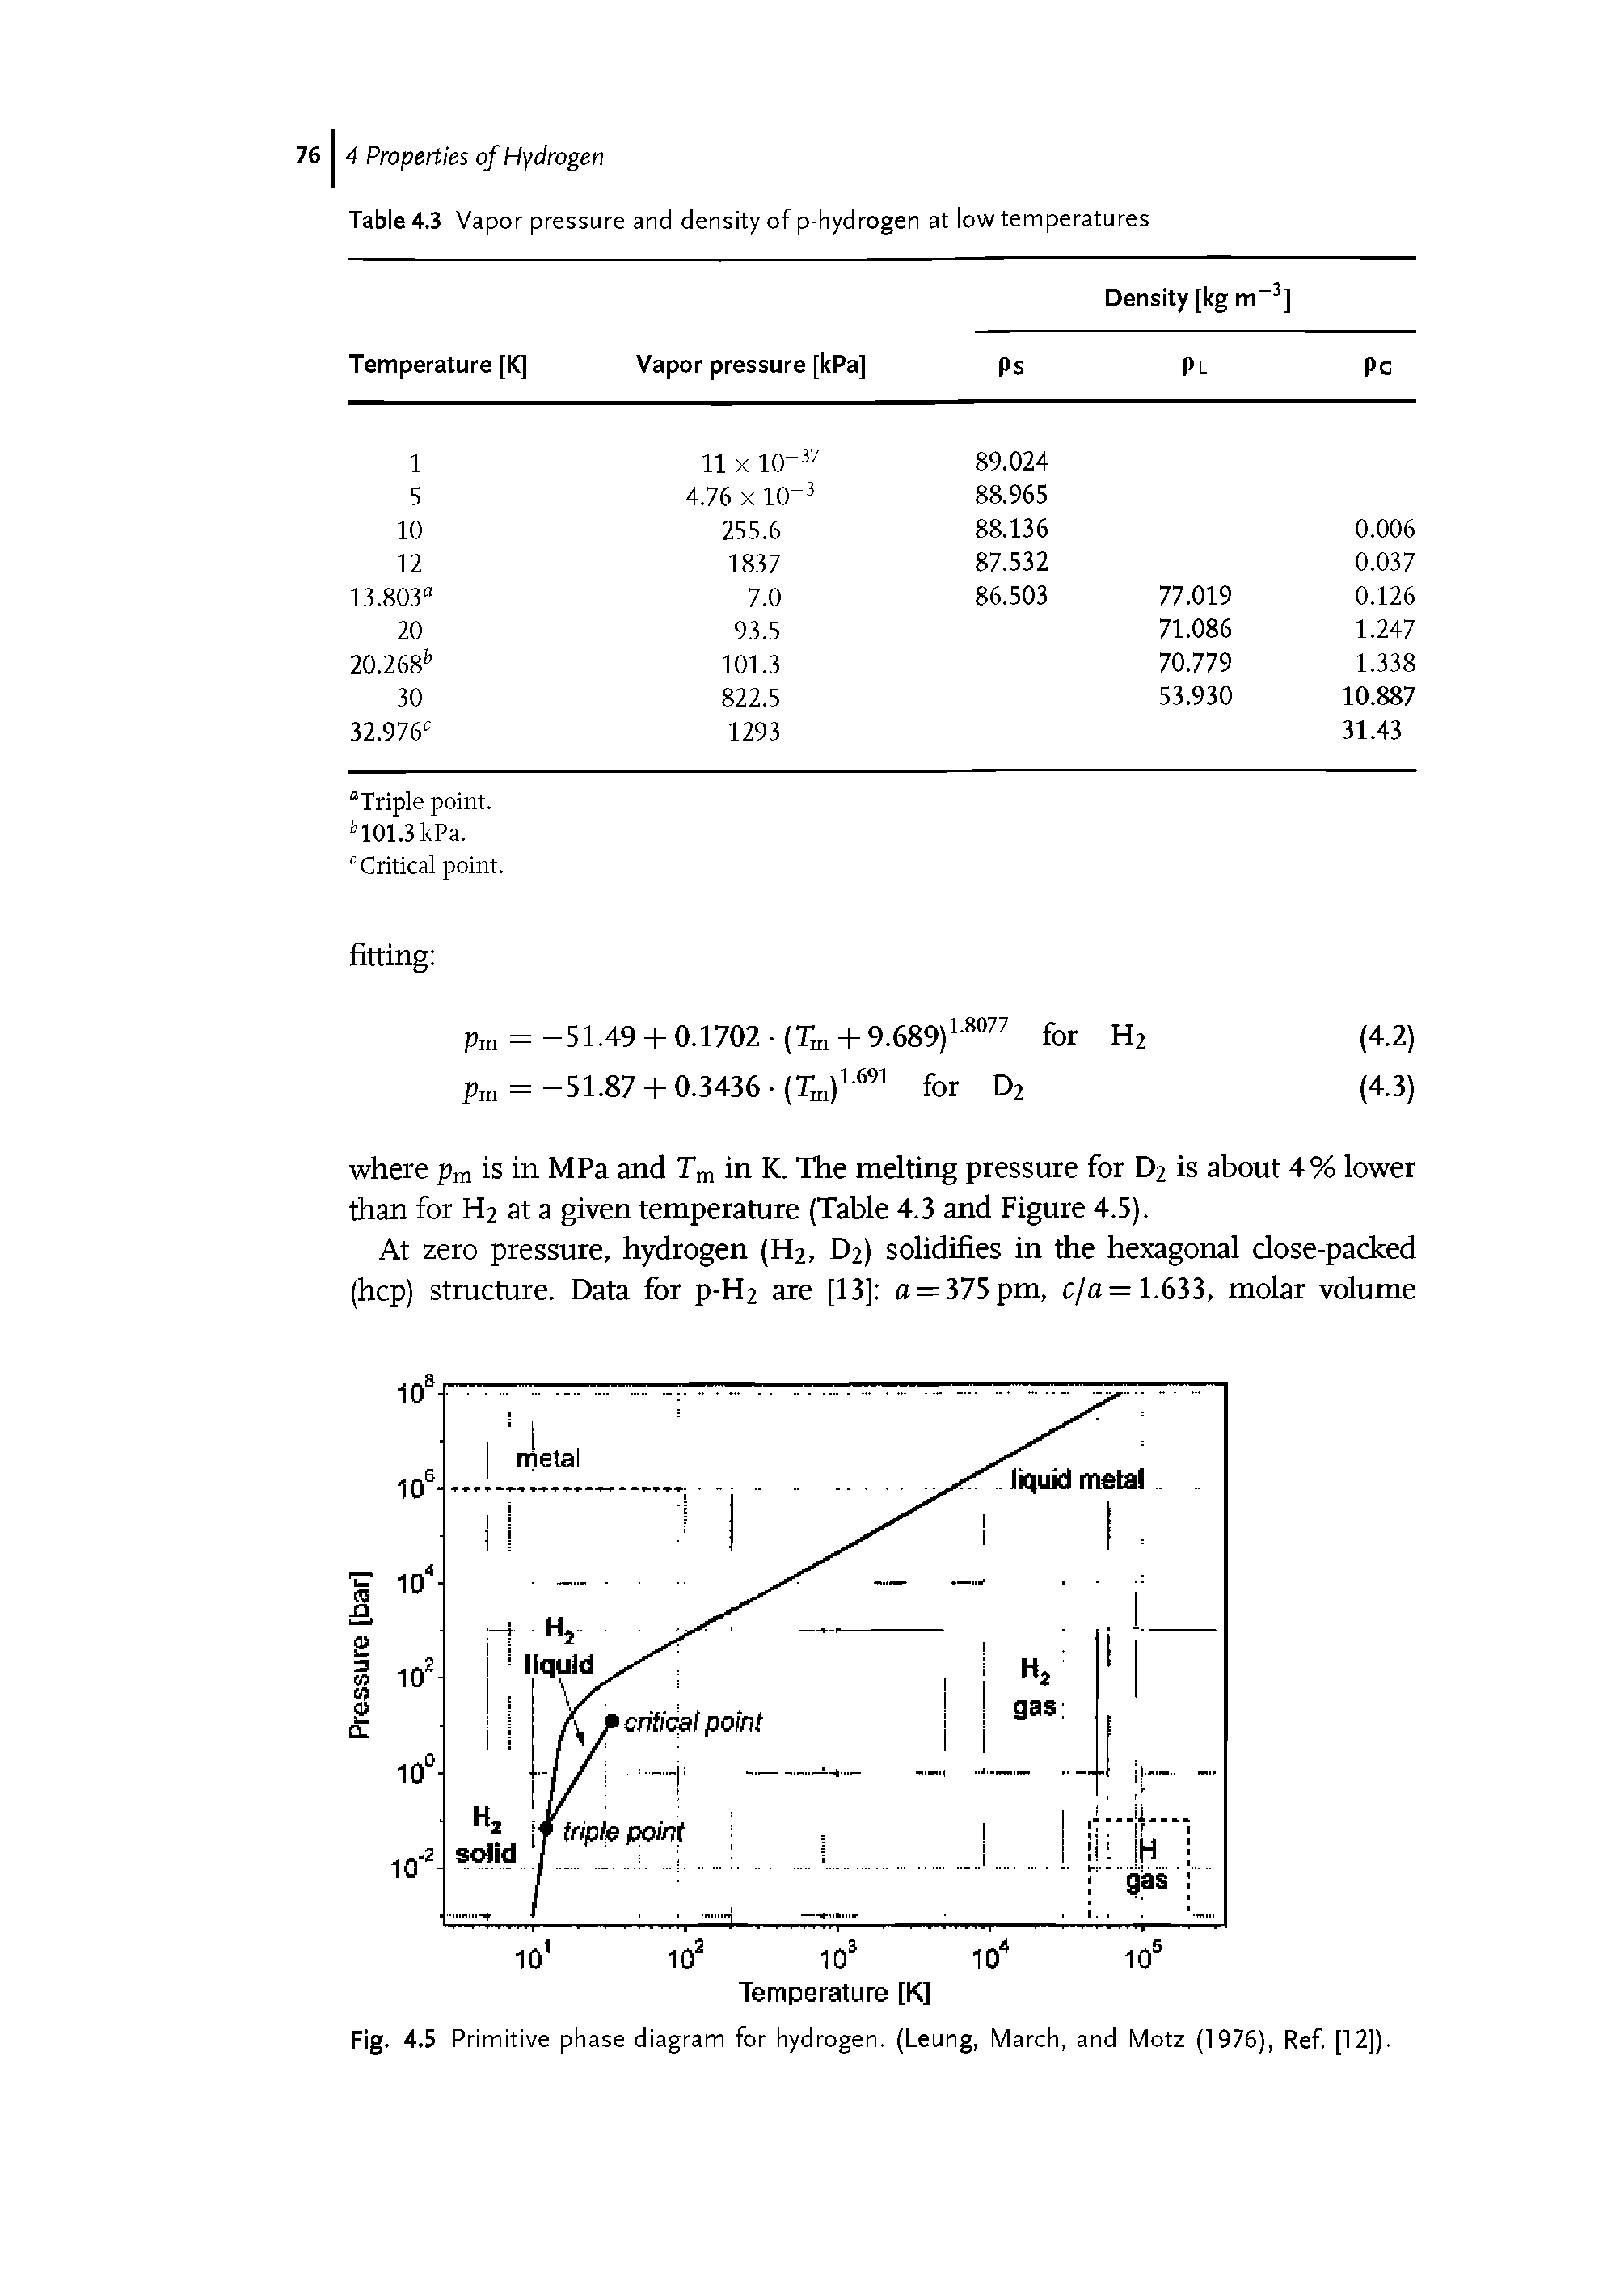 Fig. 4.5 Primitive phase diagram for hydrogen. (Leung, March, and Motz (1976), Ref [12]).